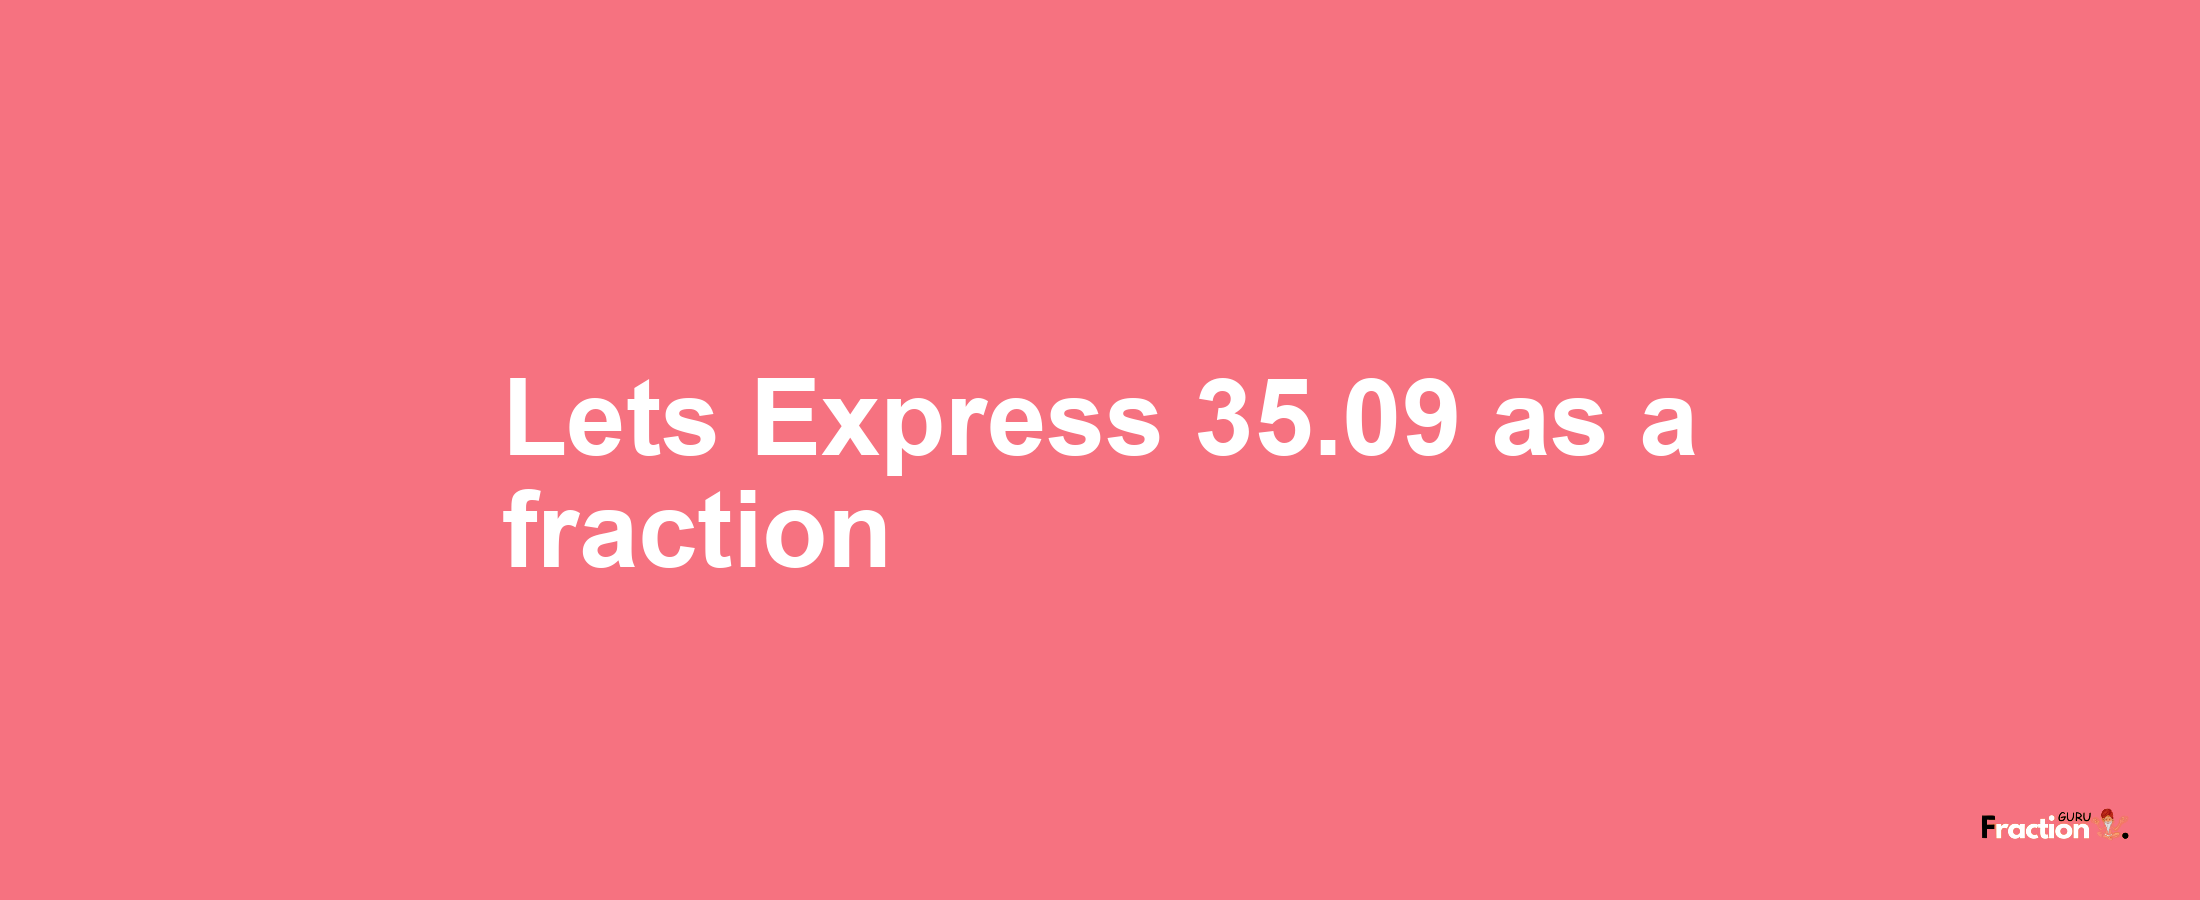 Lets Express 35.09 as afraction